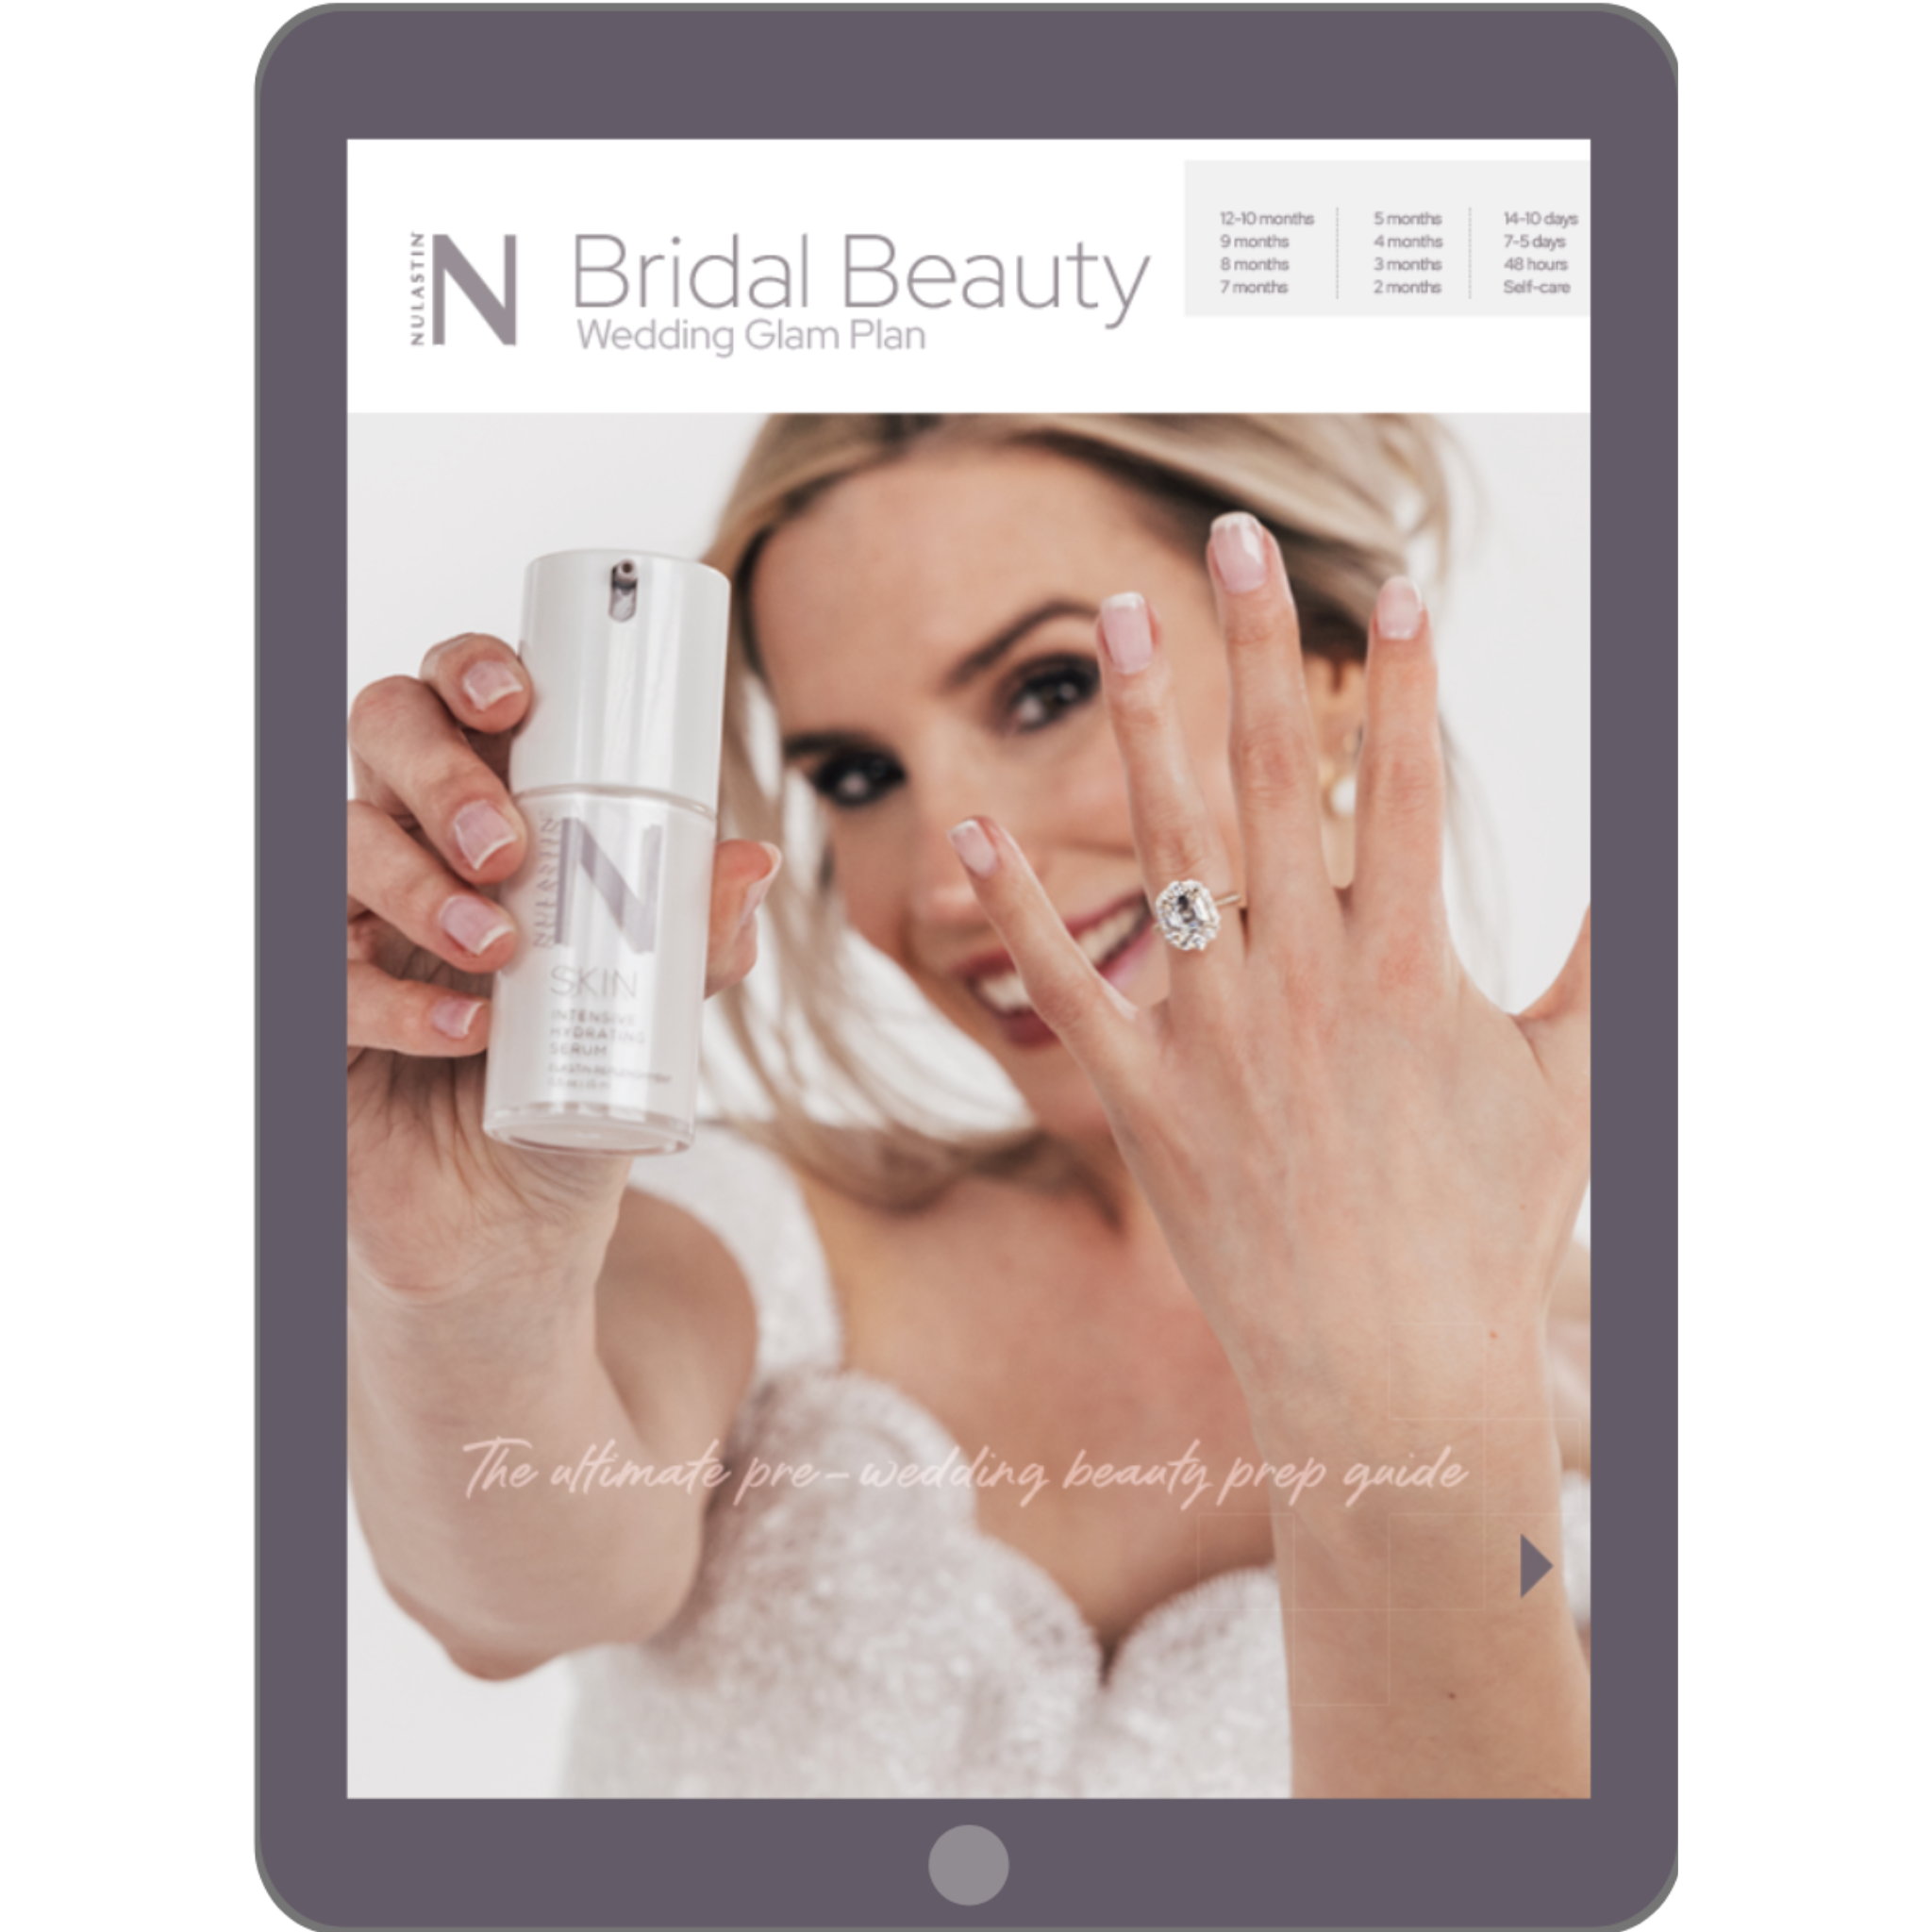 » E-Book: Bridal Beauty Wedding Glam Plan (Emailed After Purchase) (100% off)